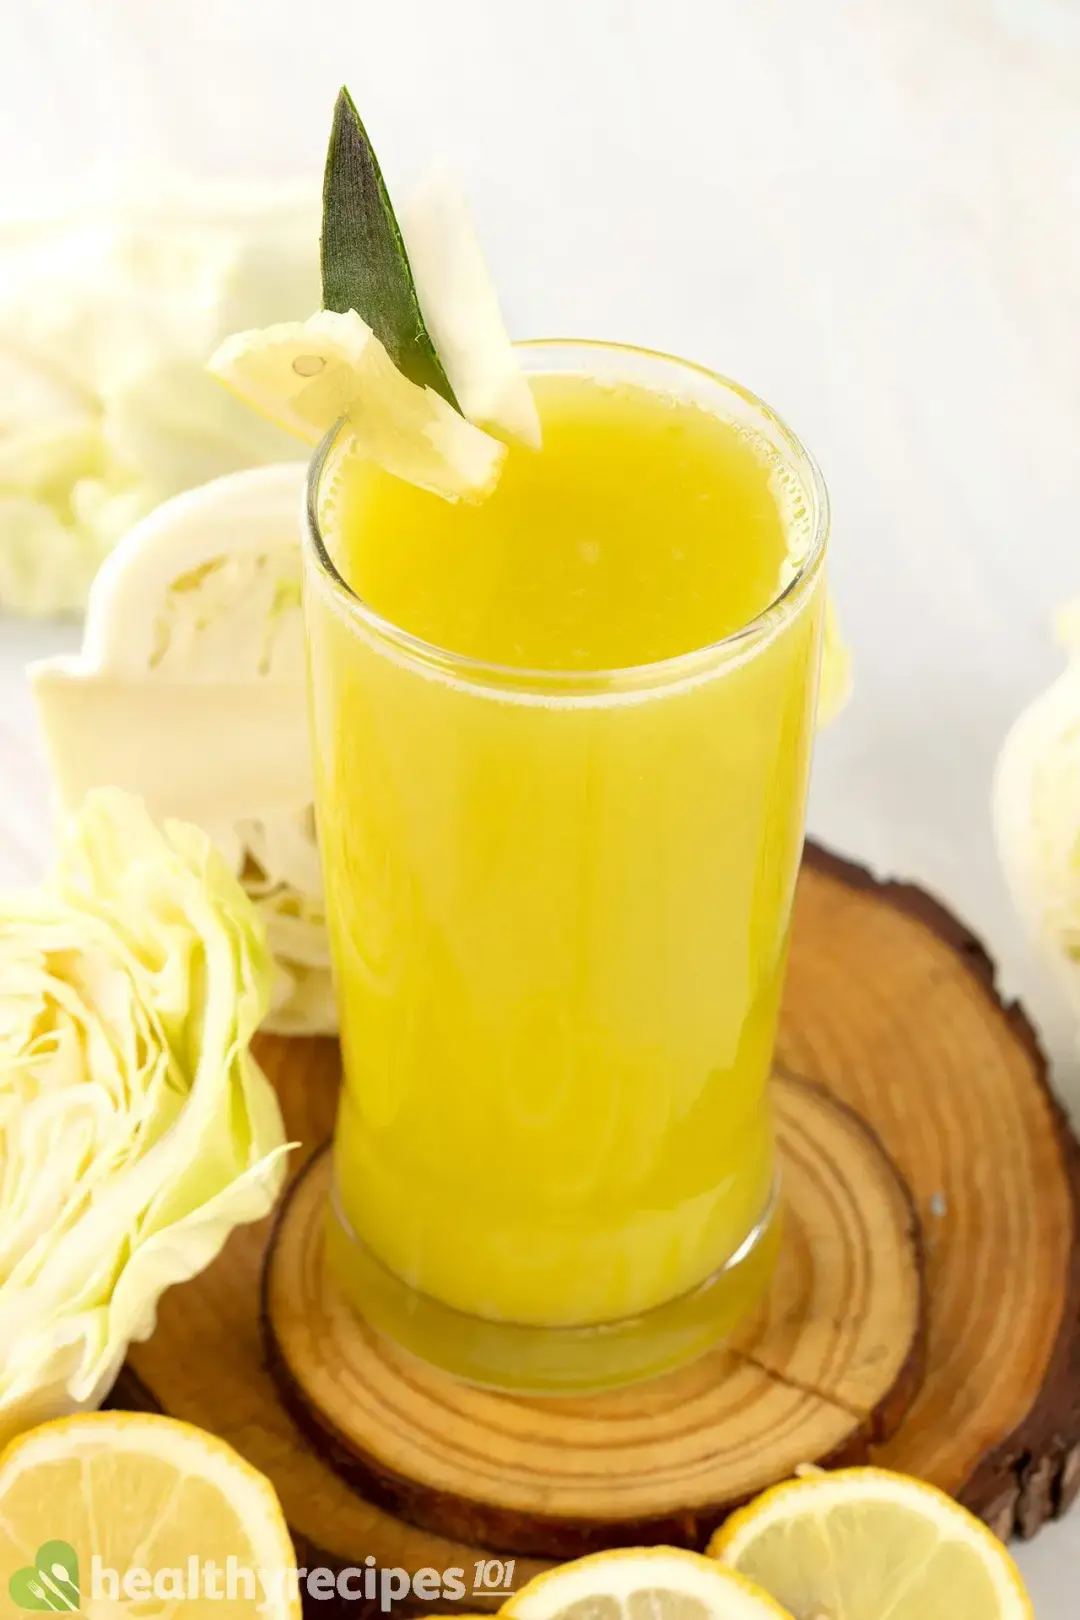 A glass of yellow-green cabbage drink, next to some cabbages and lemon wheels